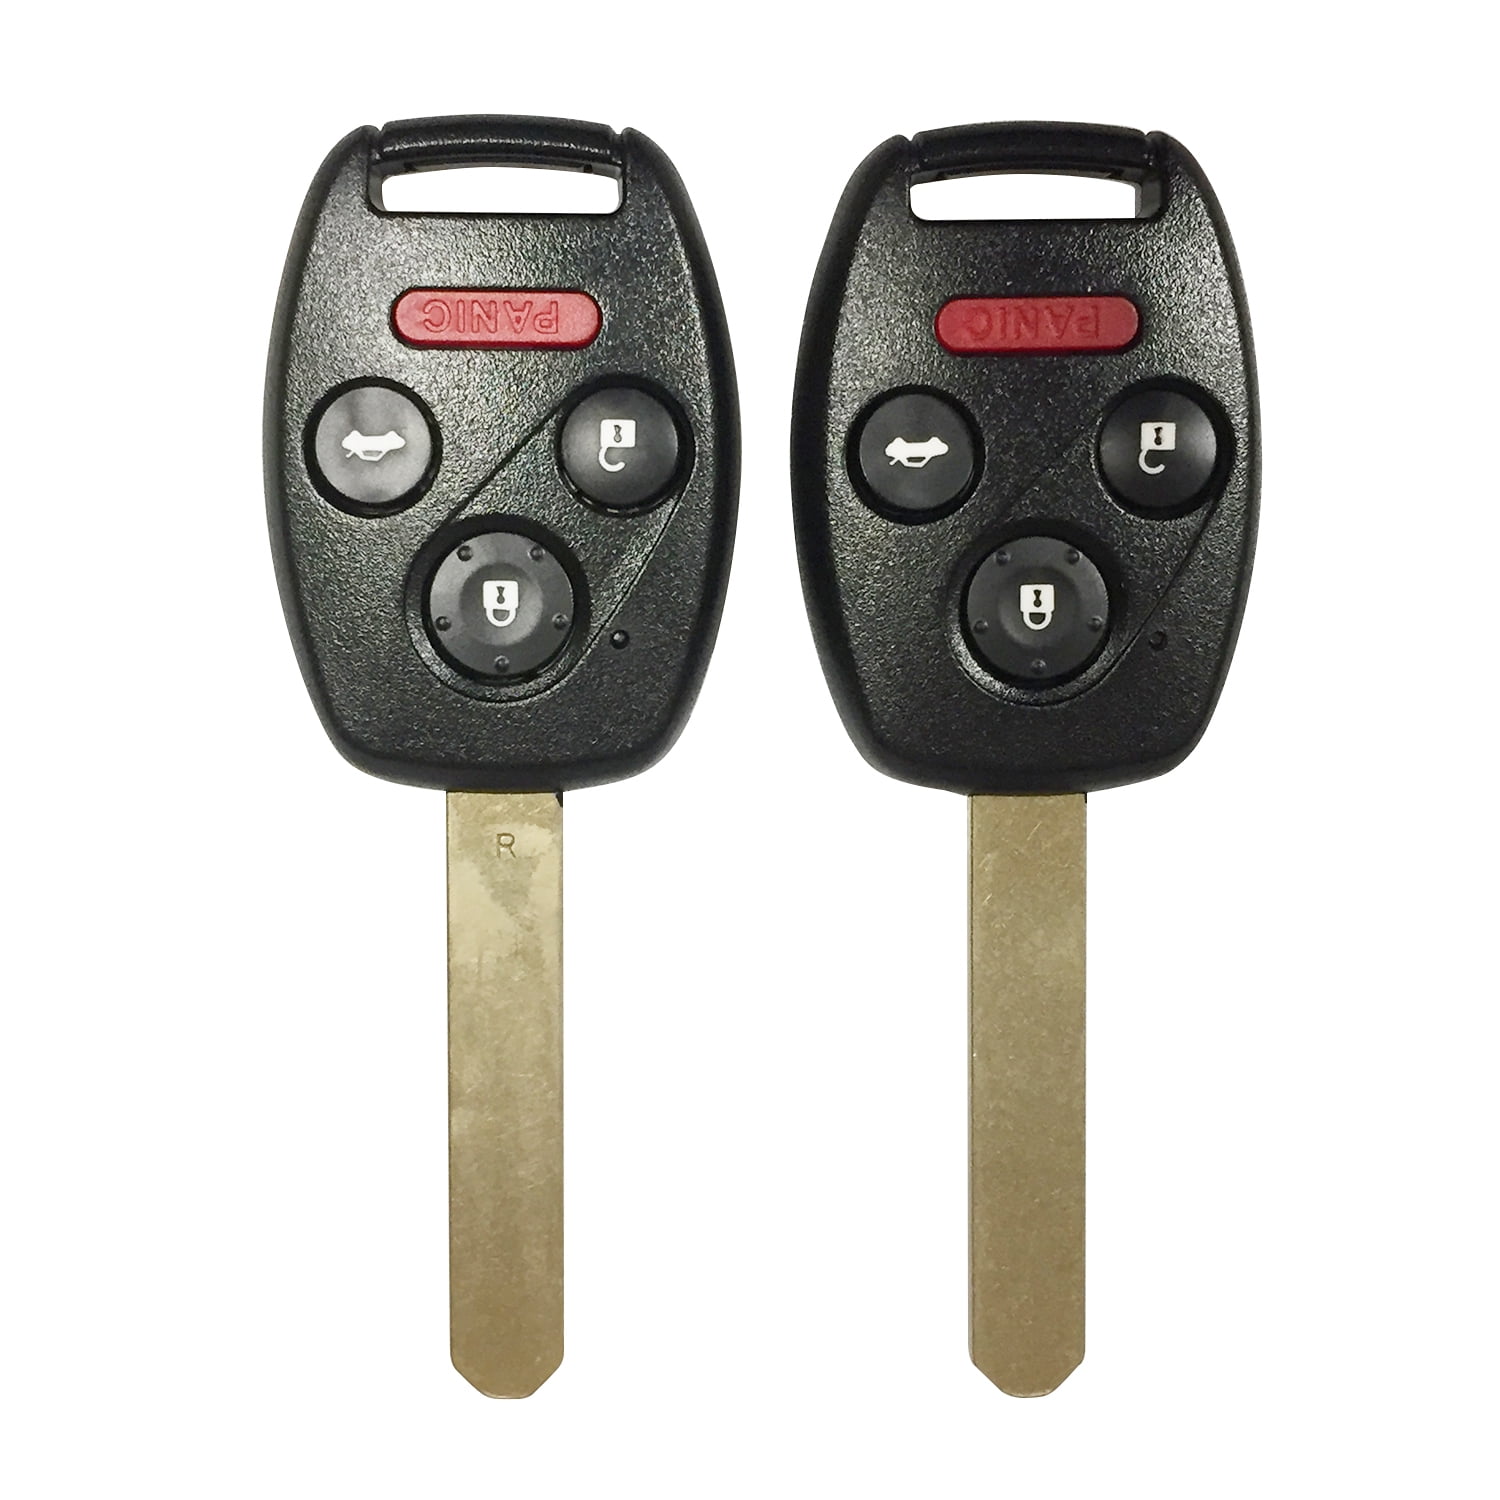 2 Replacement For 2003 2004 2005 2006 2007 Honda Accord Key Fob Remote 